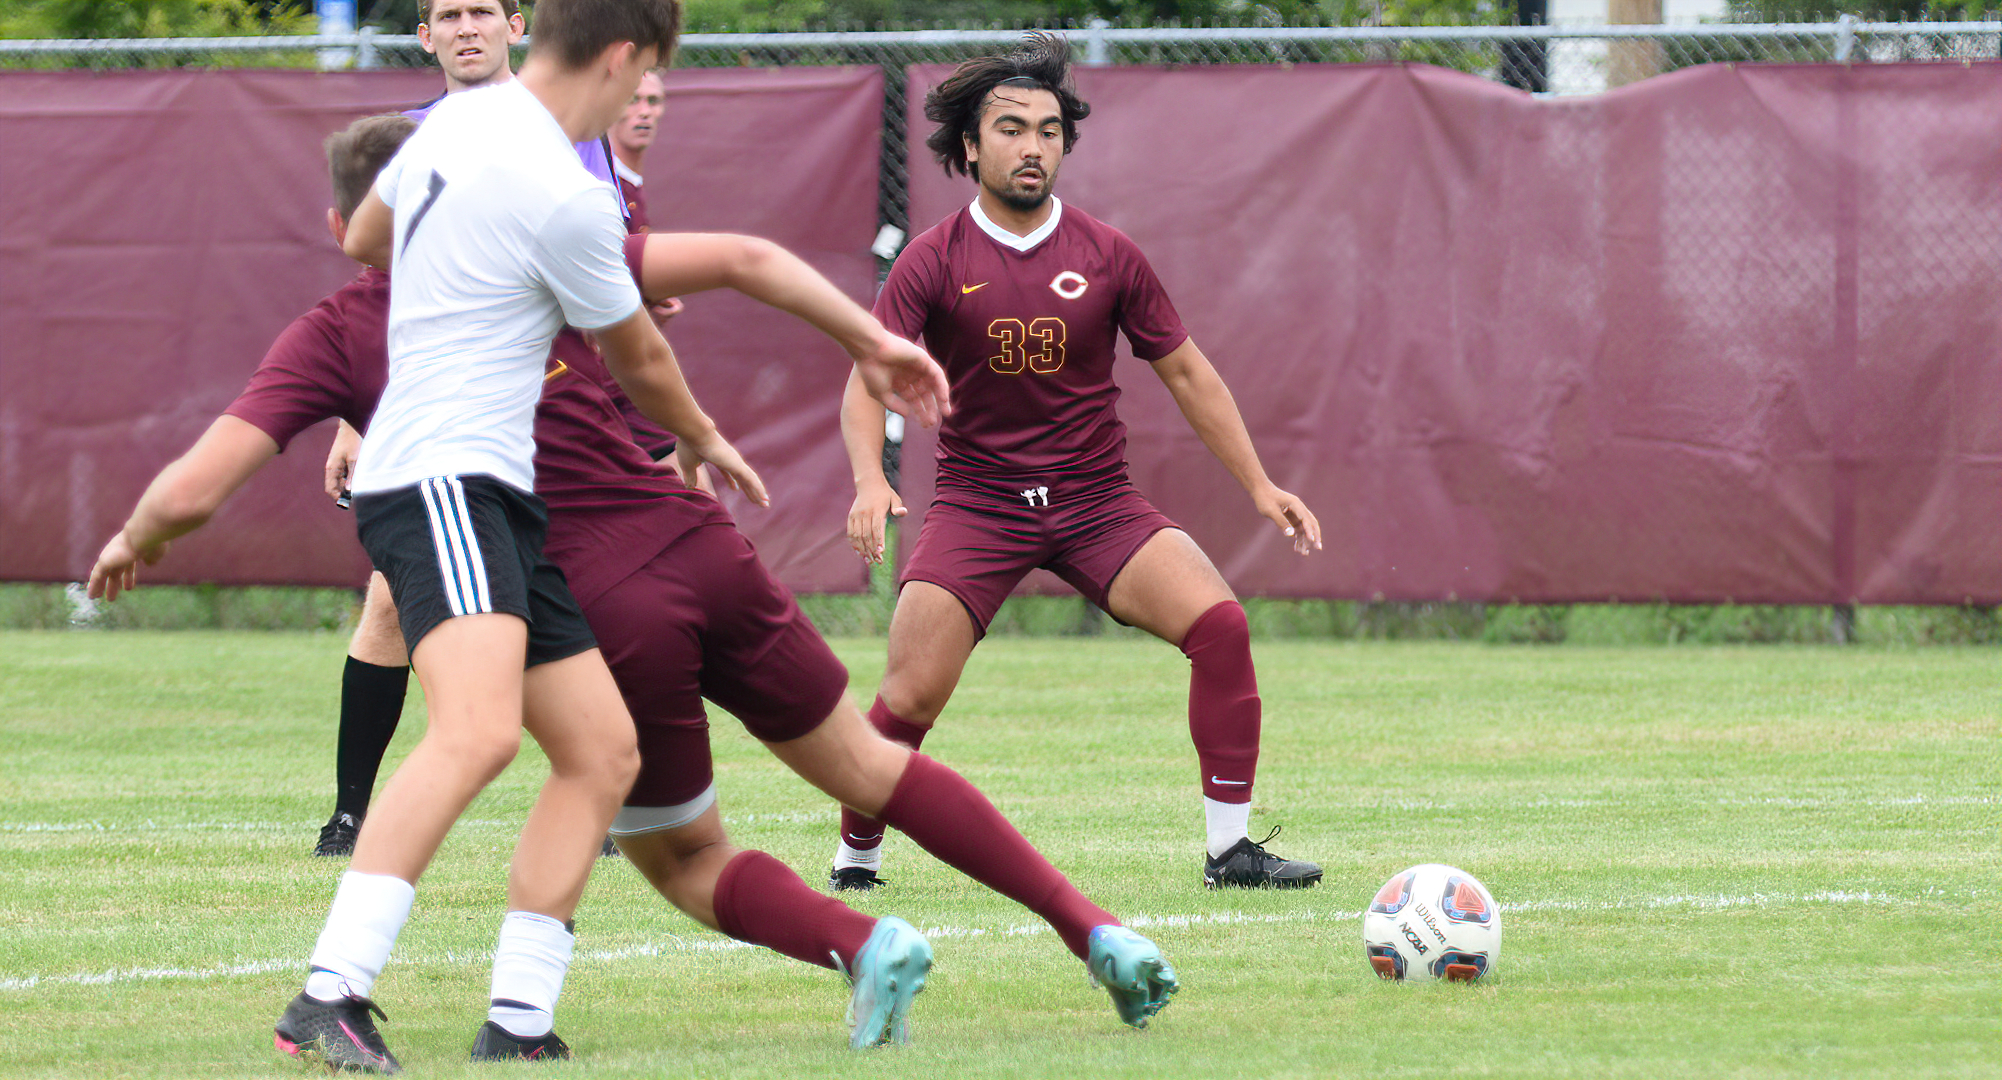 Junior Kai Black (#33) scored his second goal of the season in the seventh minute of play in the Cobbers' game at St. John's